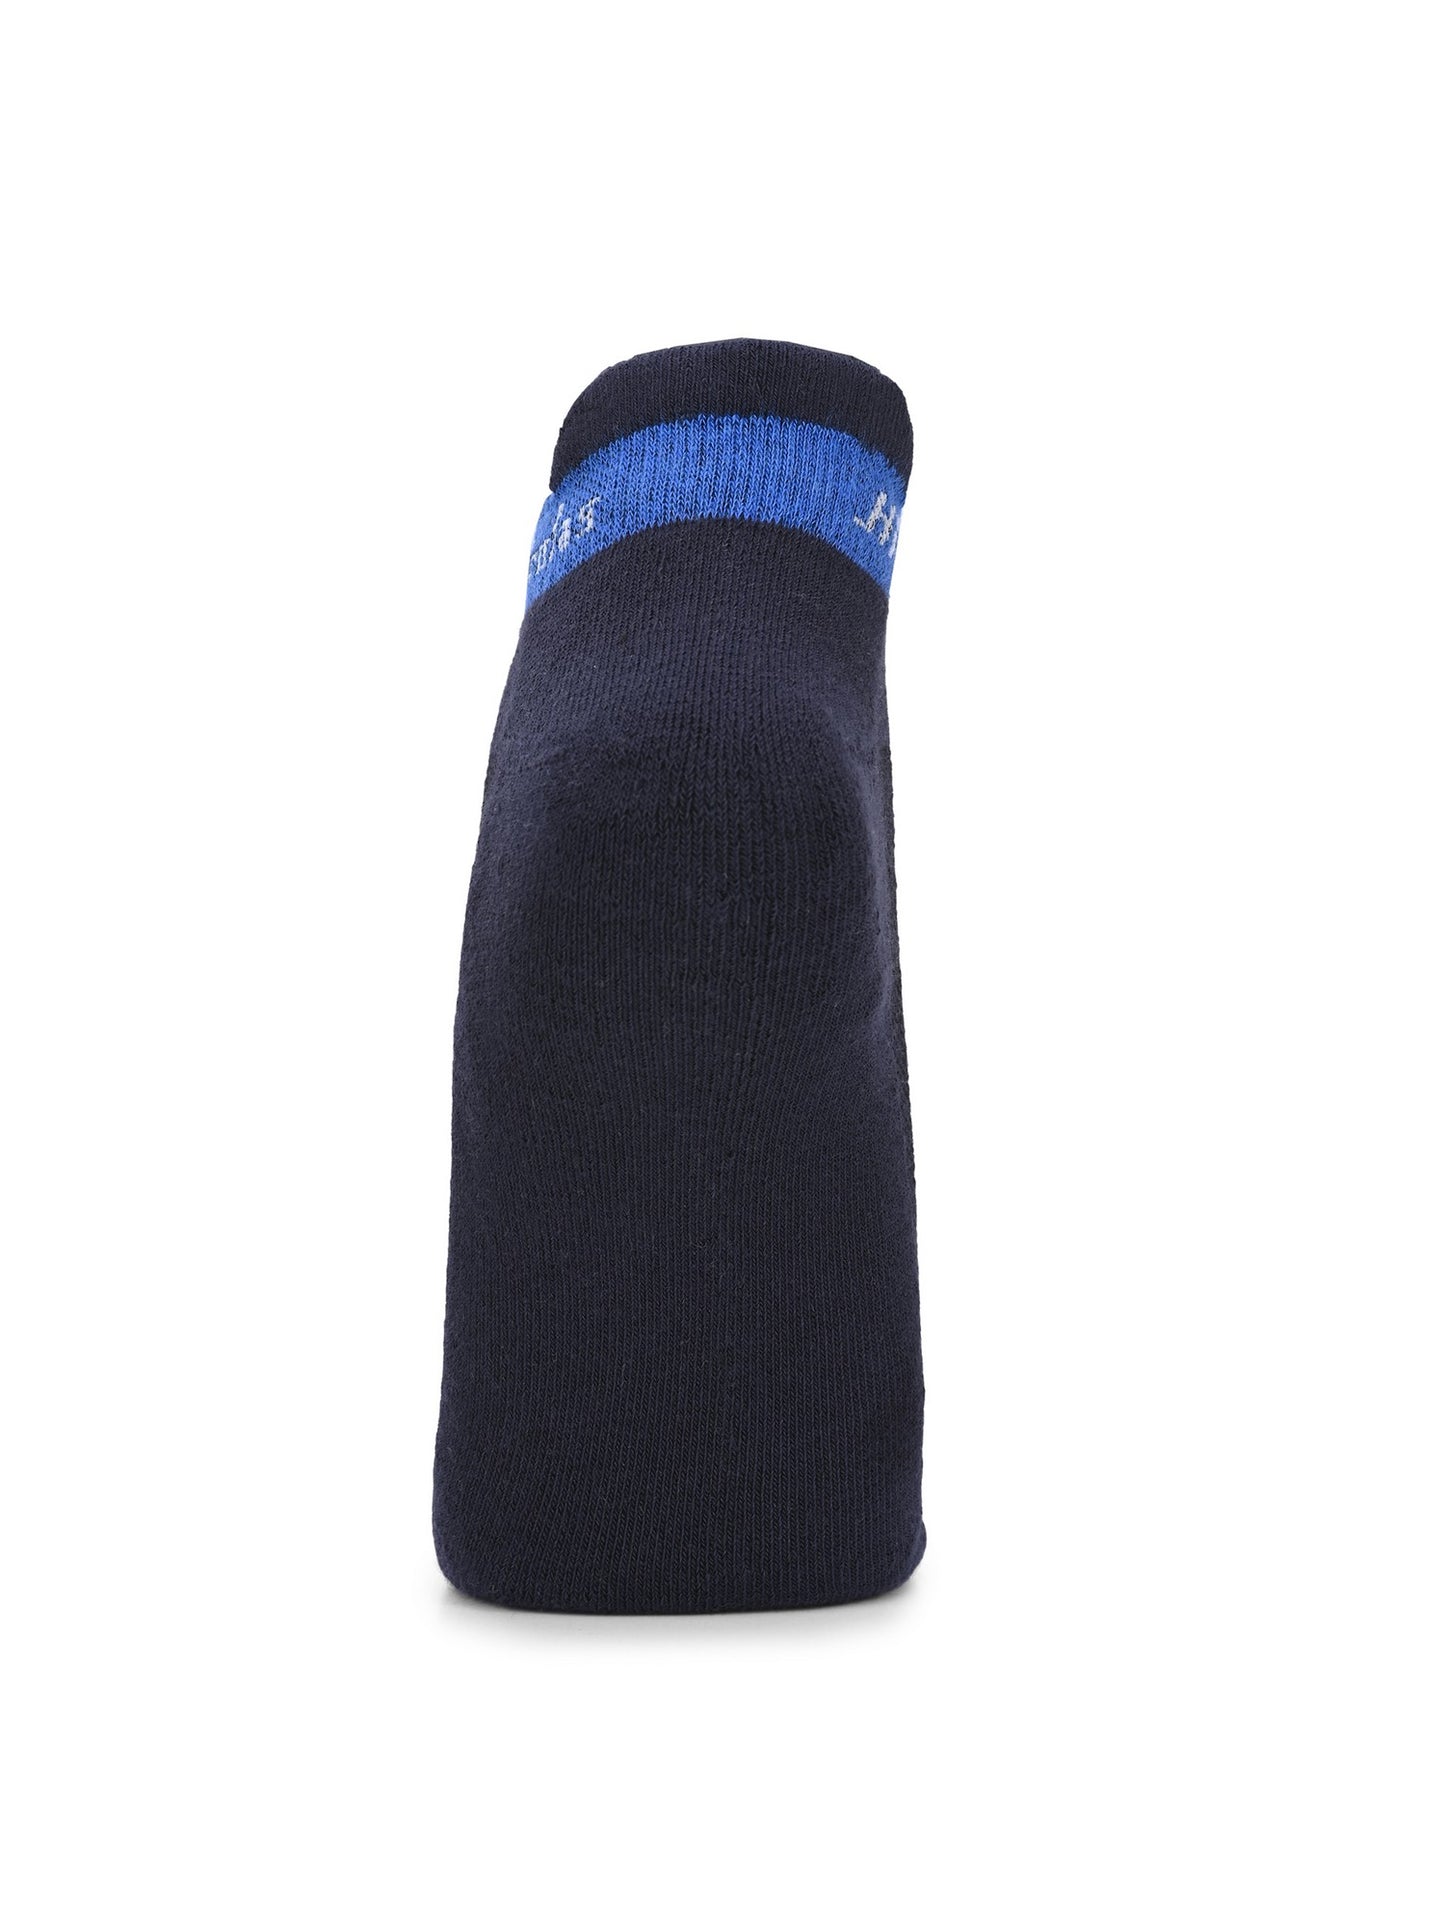 Hirolas thick cotton Half Terry cushioned Anti-Odour Breathable Antibacterial Gym, Running, Performance Athletic Running Ankle length Sports Socks for Men (Free Size) | Made with 100% Combed Cotton and Spandex (Black, Navy, White) - Pack of 3 socks